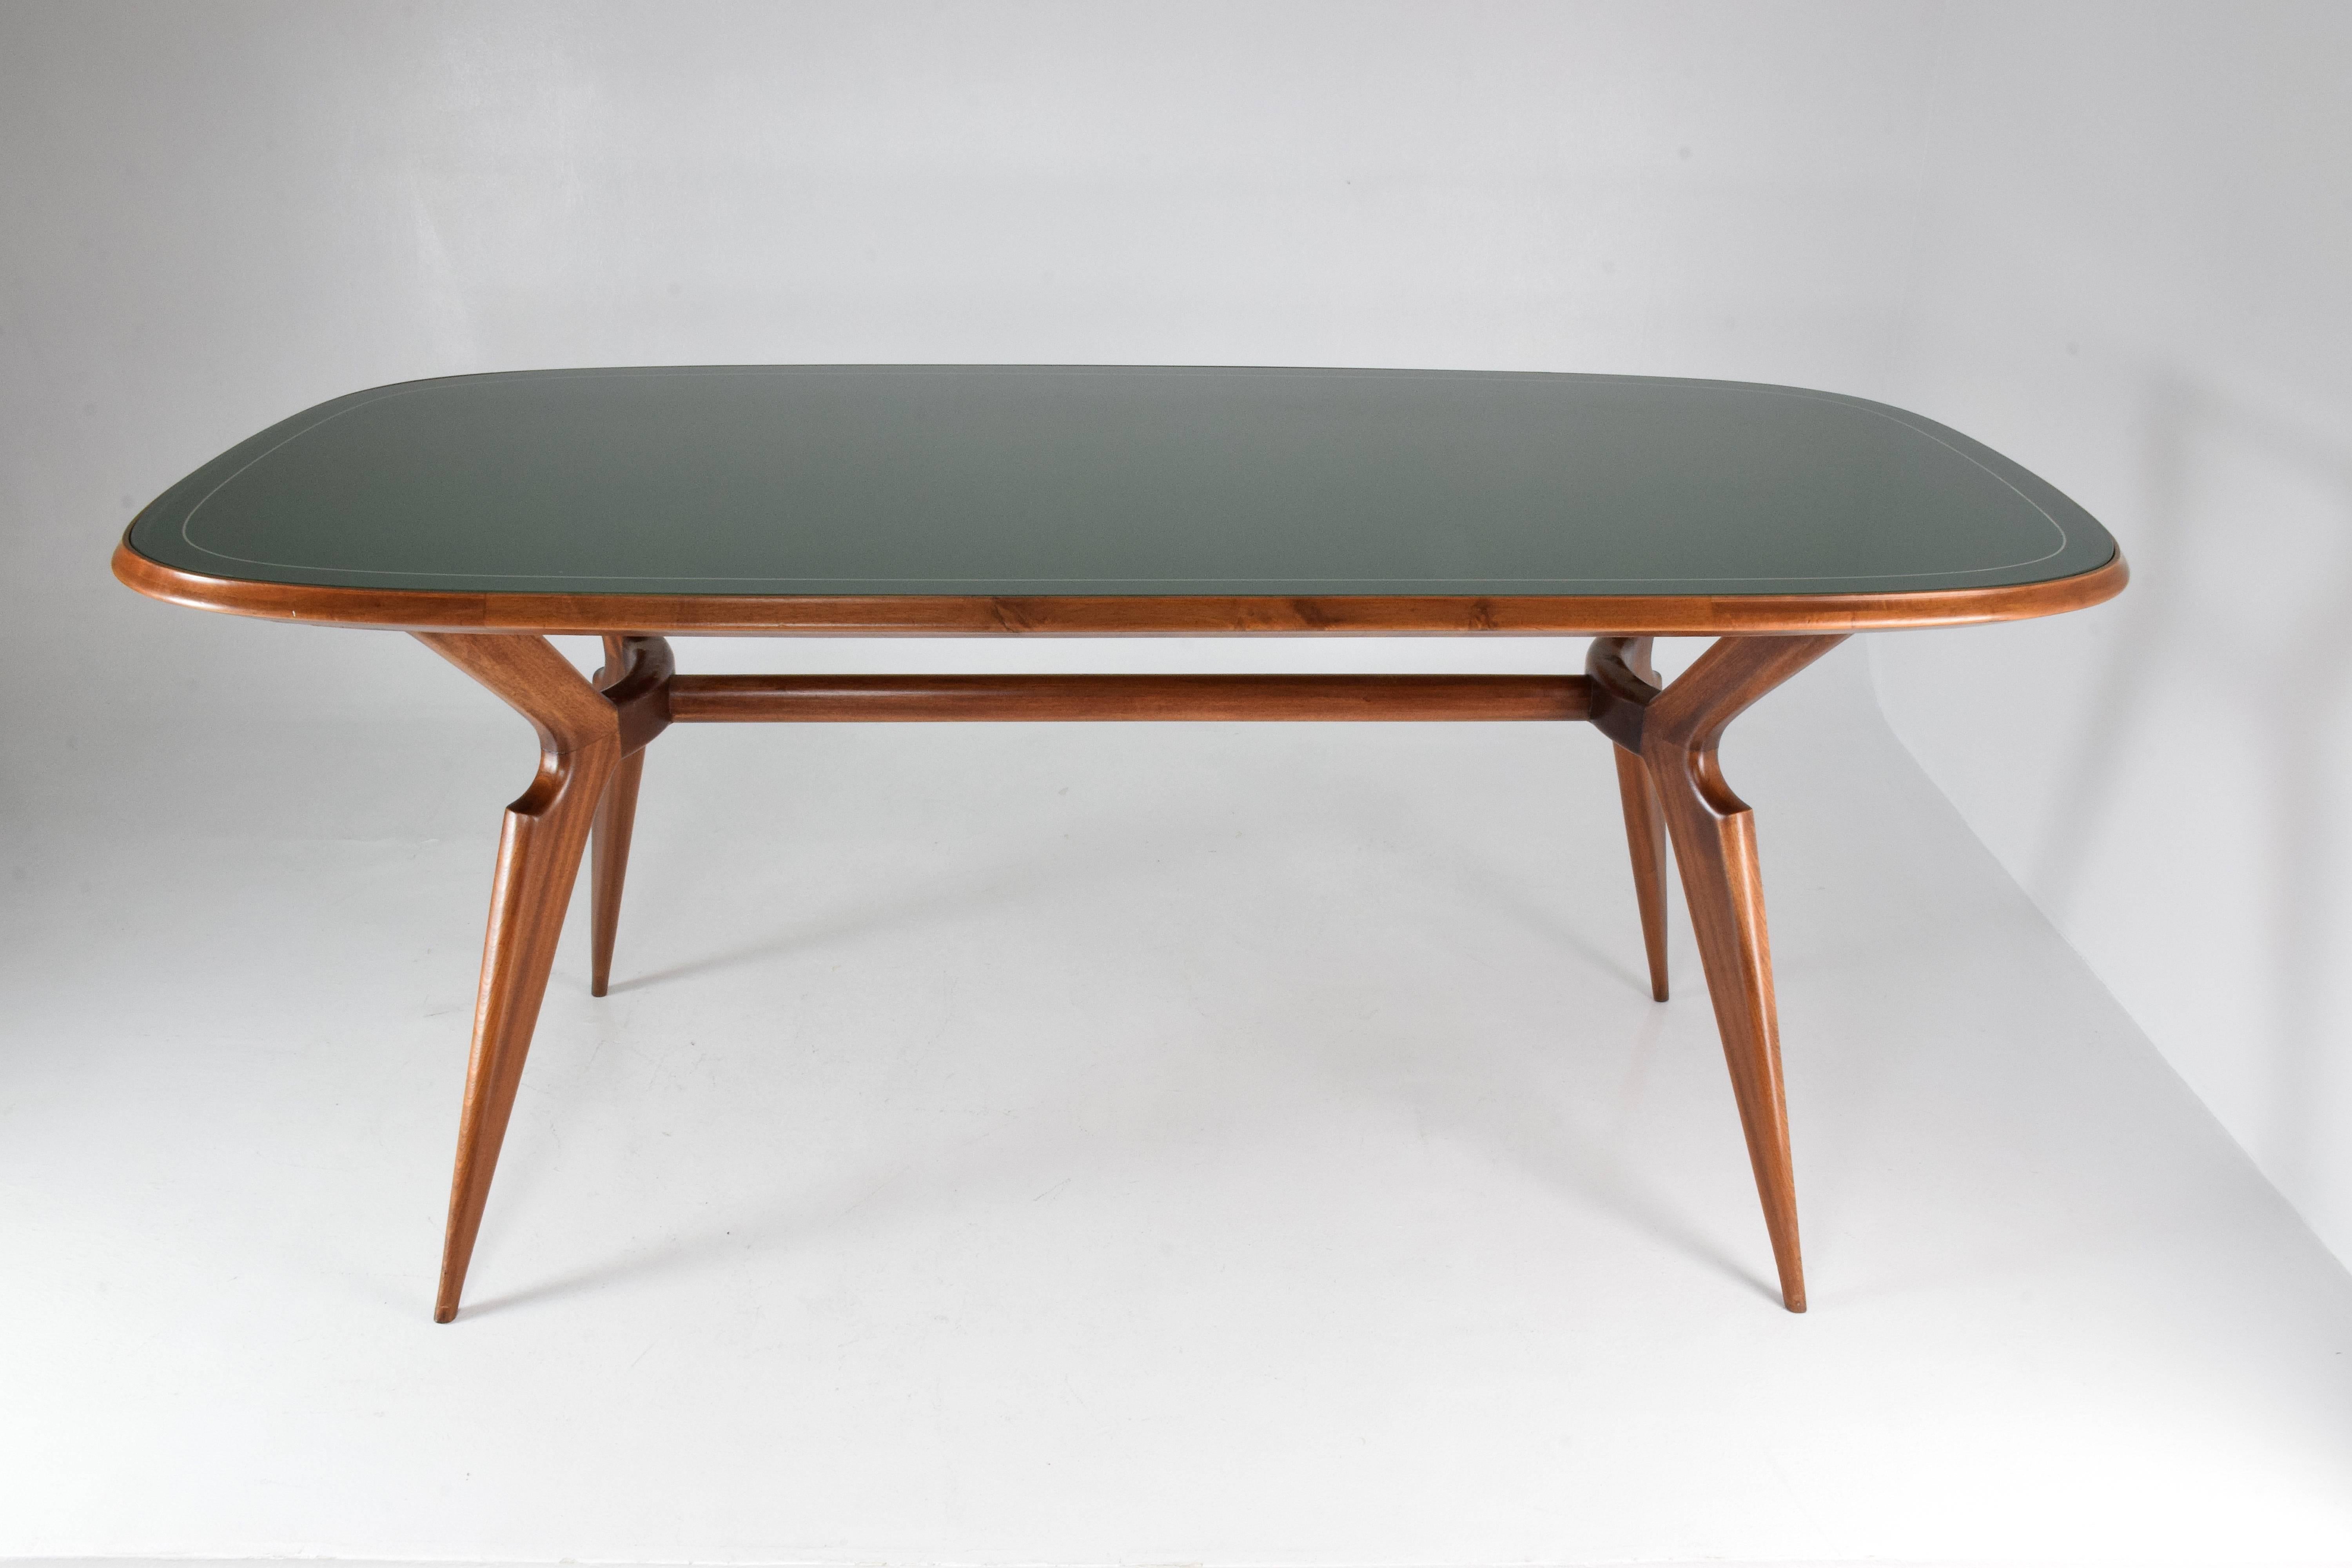 20th-century Italian vintage dining table composed of a beechwood structure designed with splayed and tapered legs typical of the Italian design period, green-colored glass tabletop with a silver lining surrounding the rounded shape.
Italy, circa